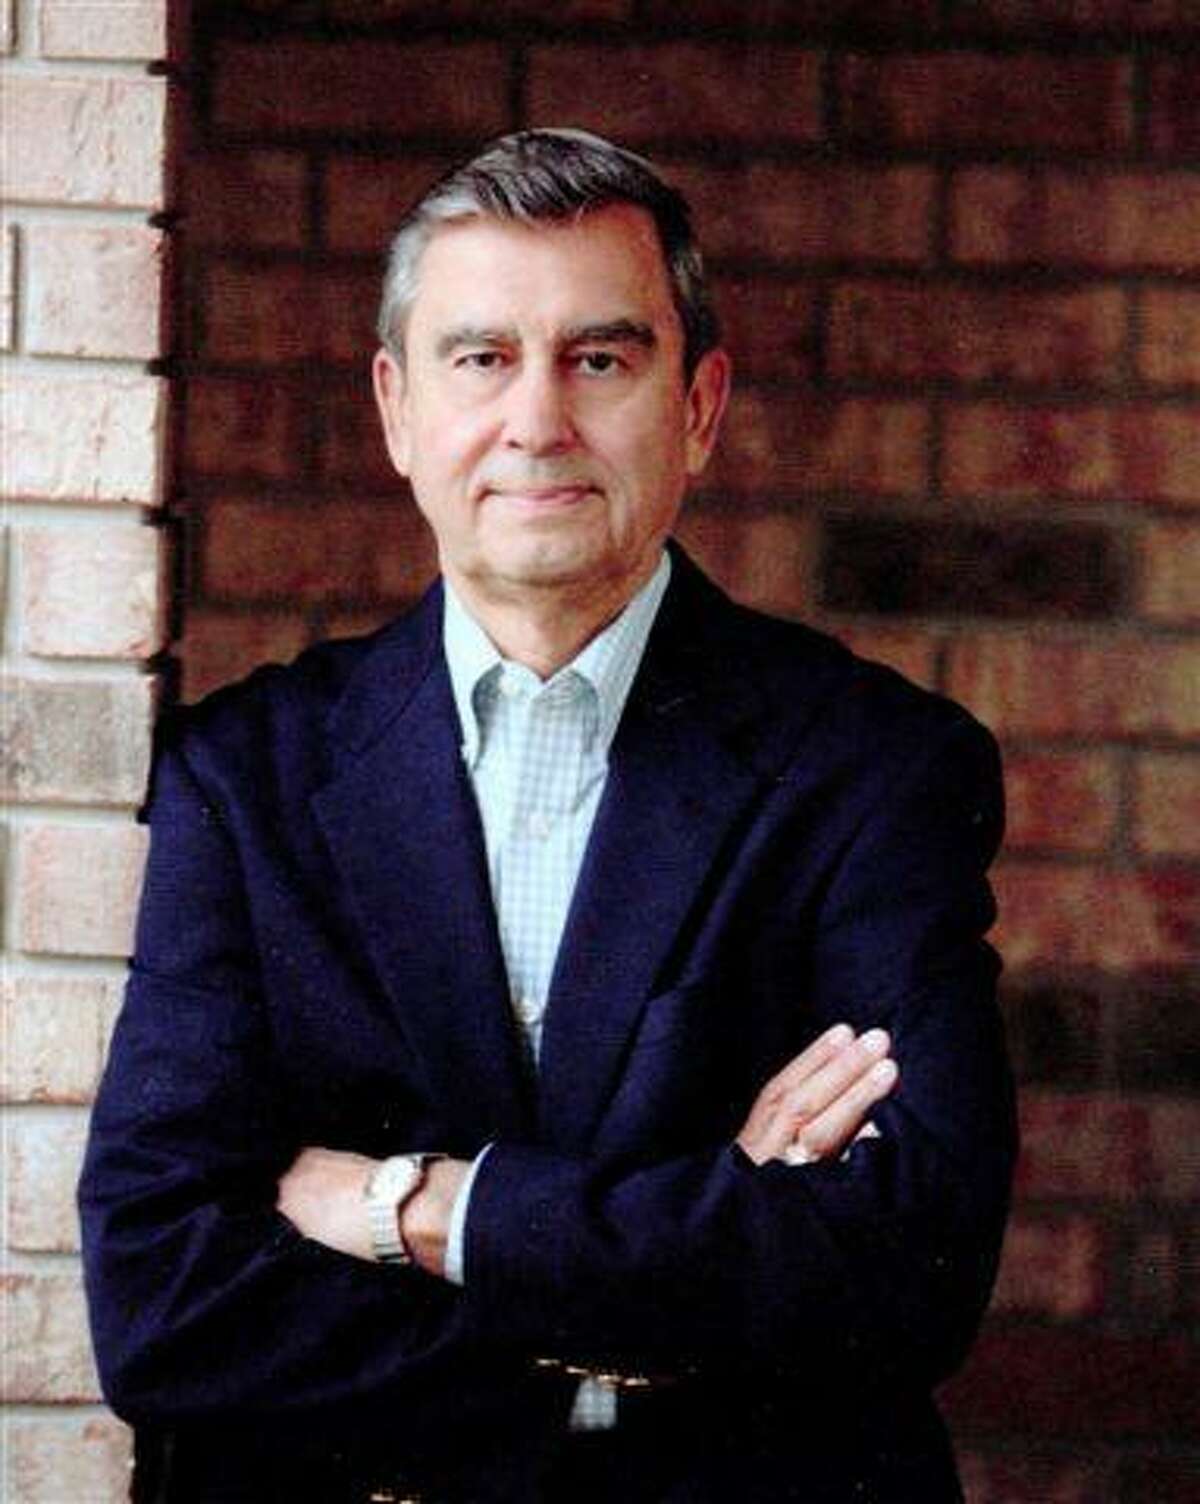 One of the founding fathers of The Woodlands, Roger Galatas died on Thursday, Aug. 29, 2019.